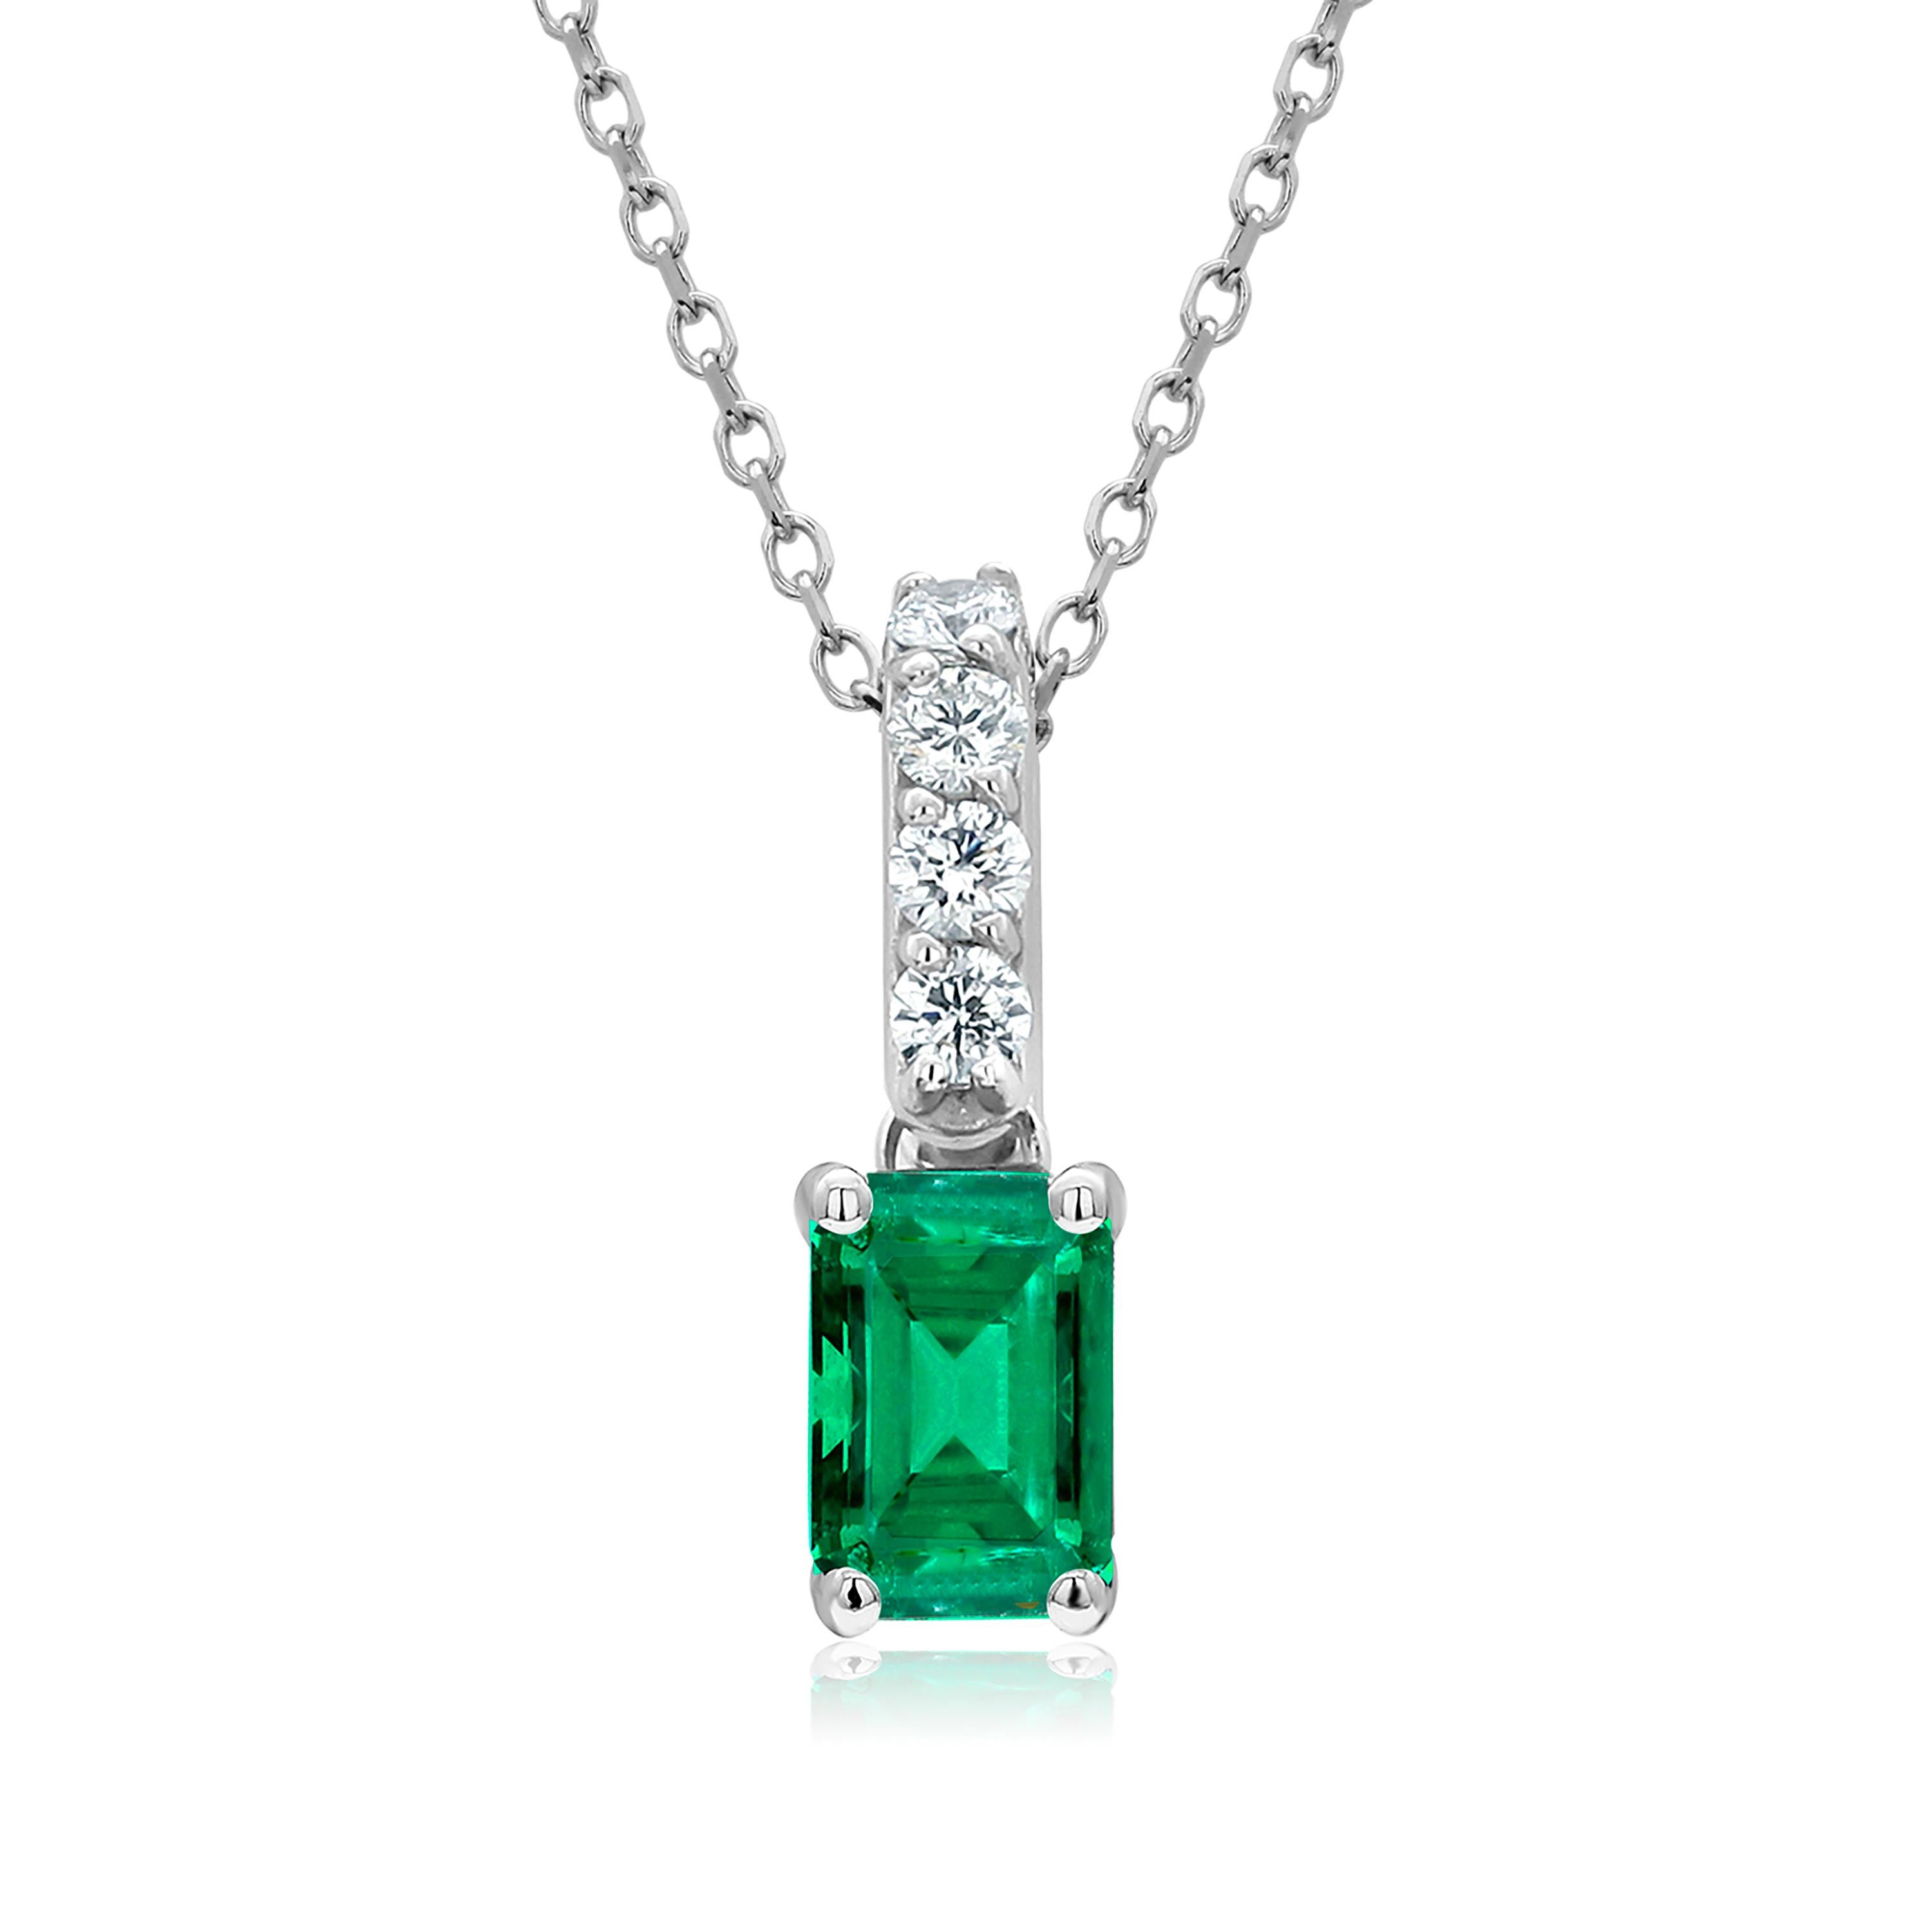 Emerald Cut White Gold Drop Pendant Necklace with Emerald and a Diamond Bail 